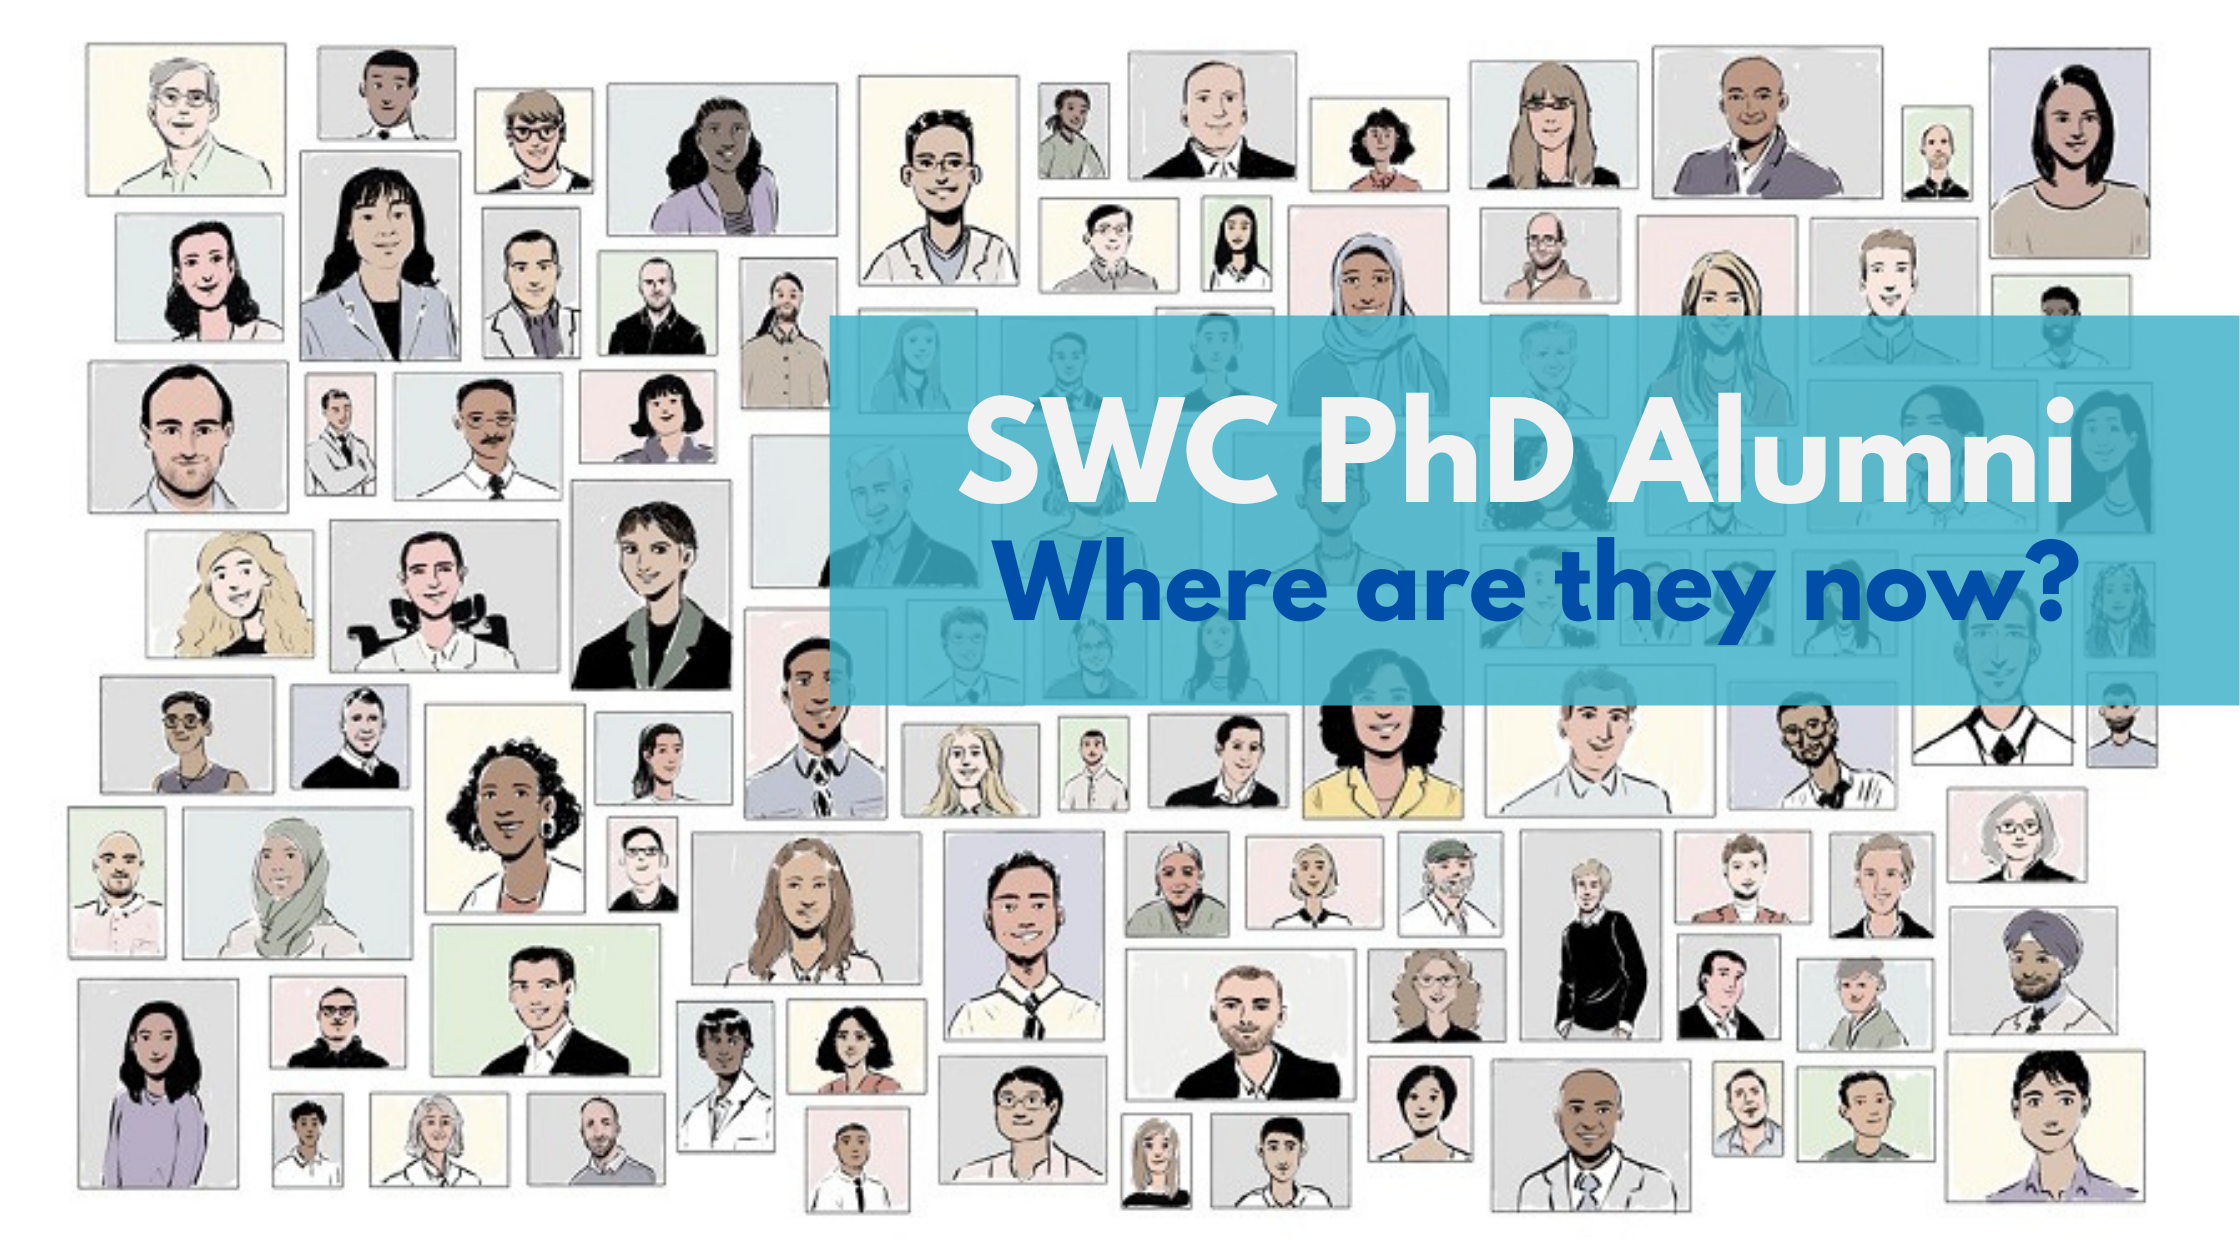 Cartoon of faces with text overlaid SWC PhD Alumni Where are they now?